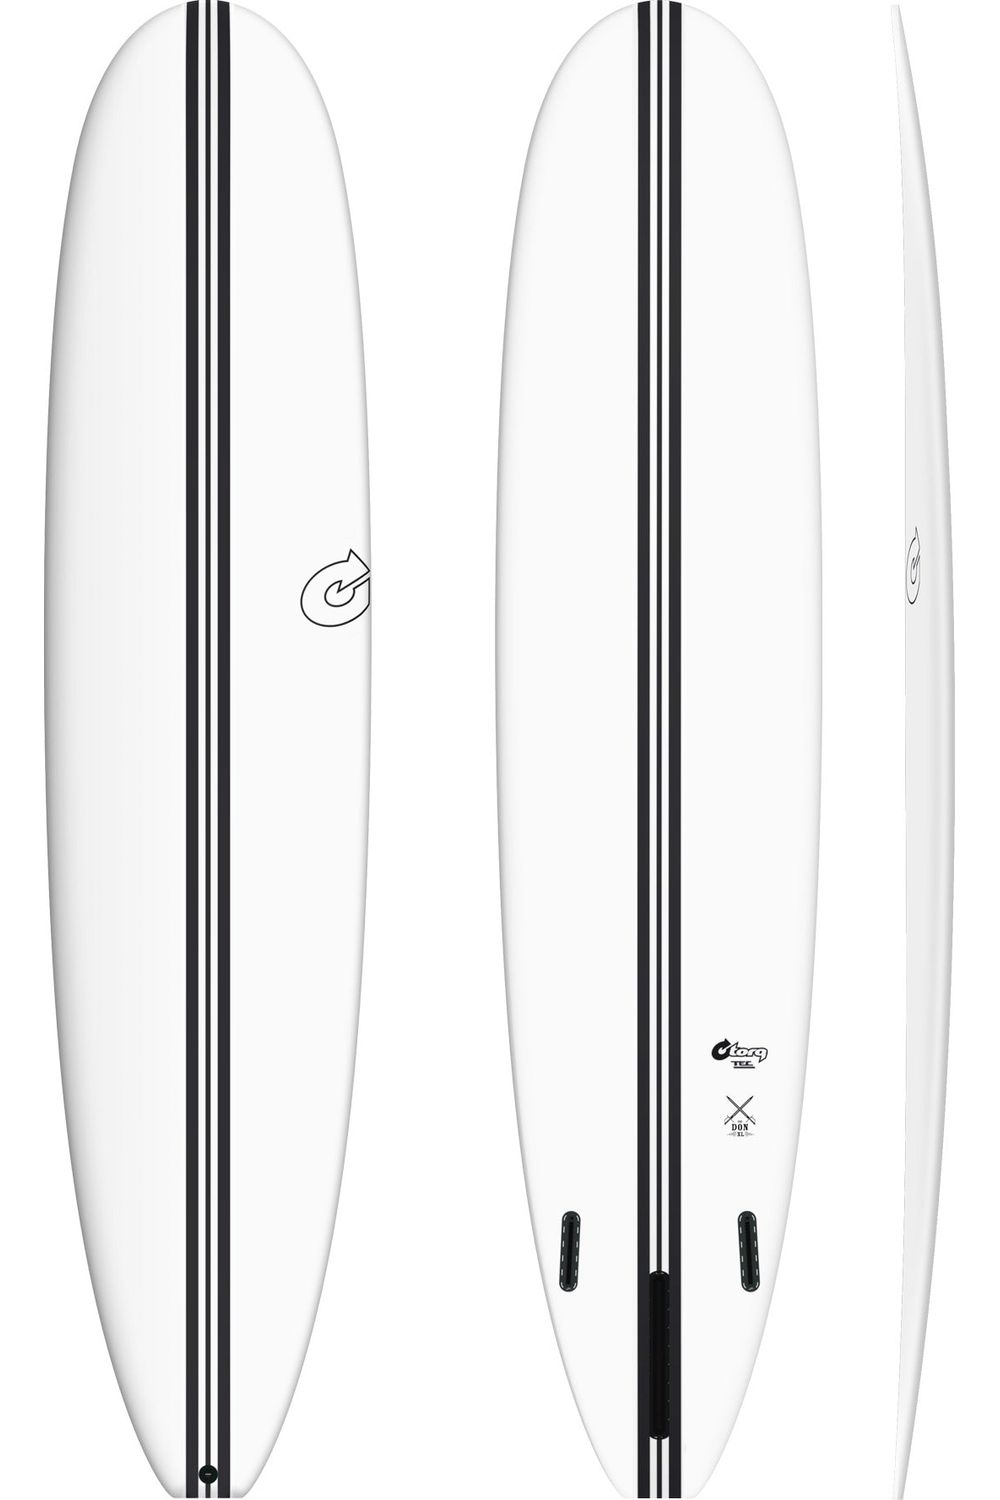 Torq TEC The Don XL Surfboard in White